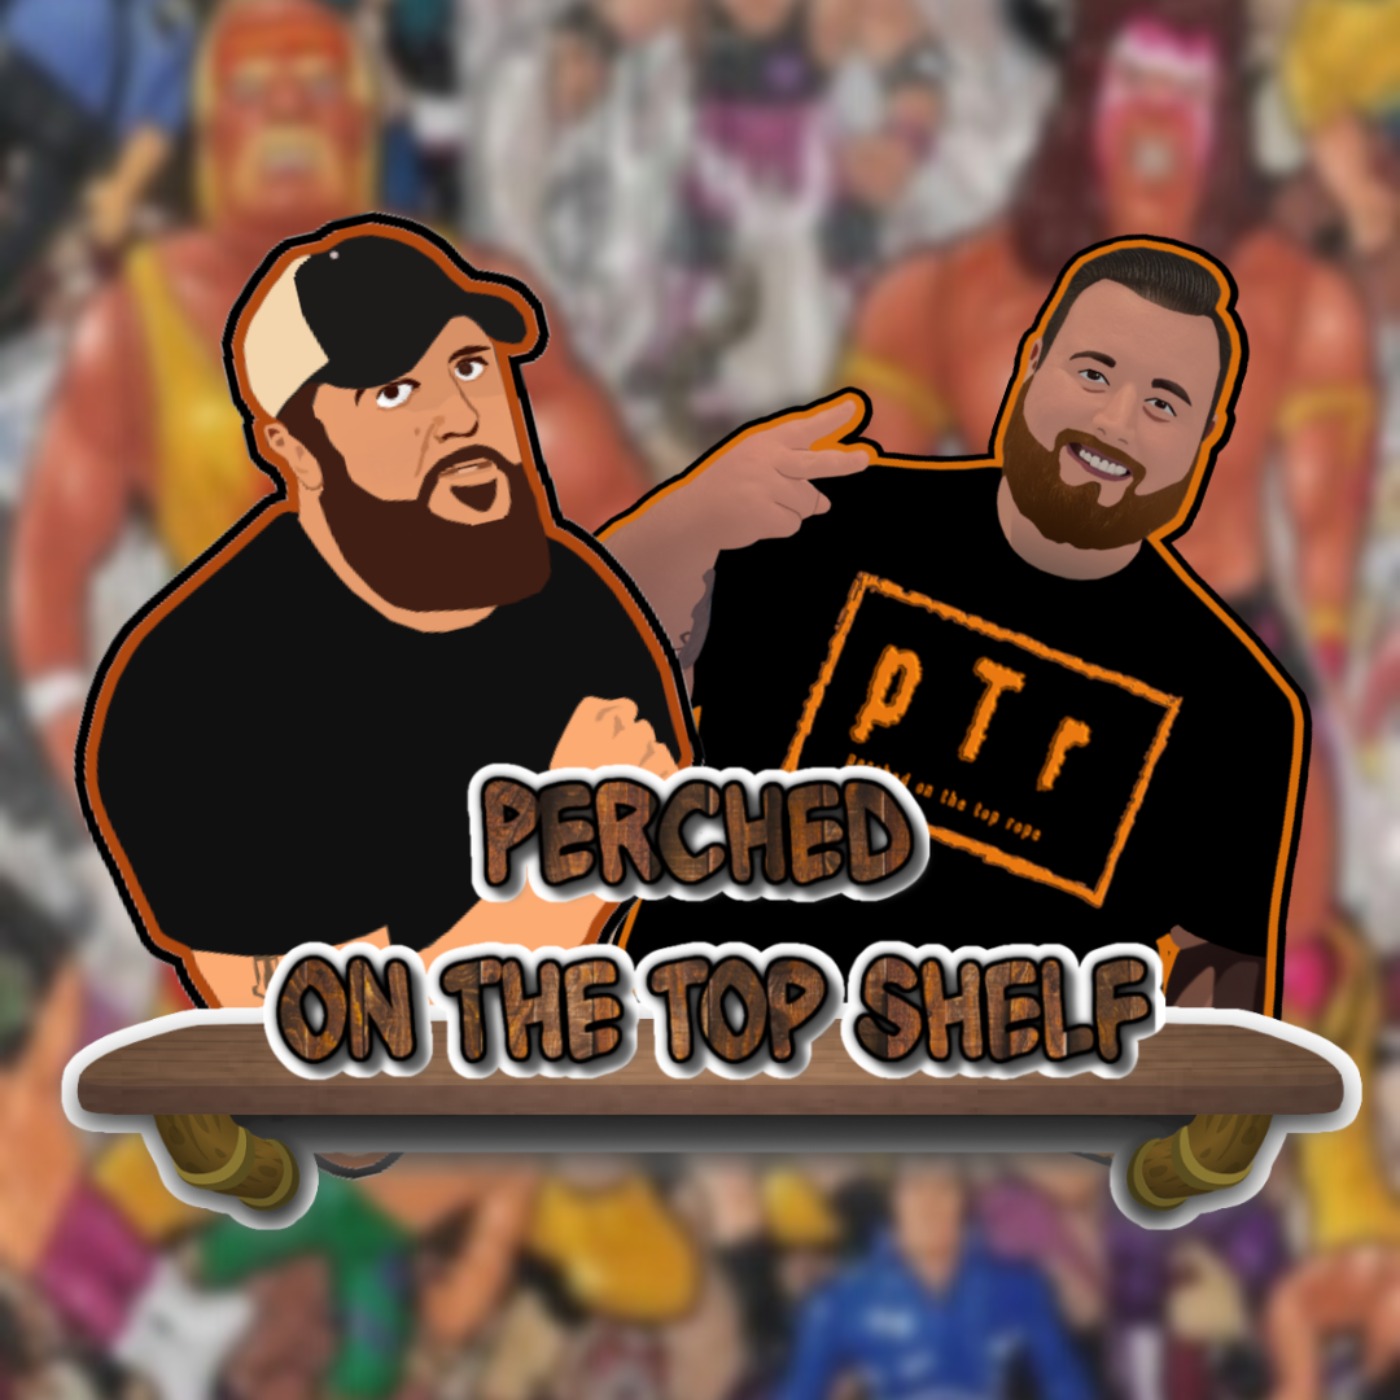 Perched On The Top Shelf EP 10 WWF Hasbro Series 1